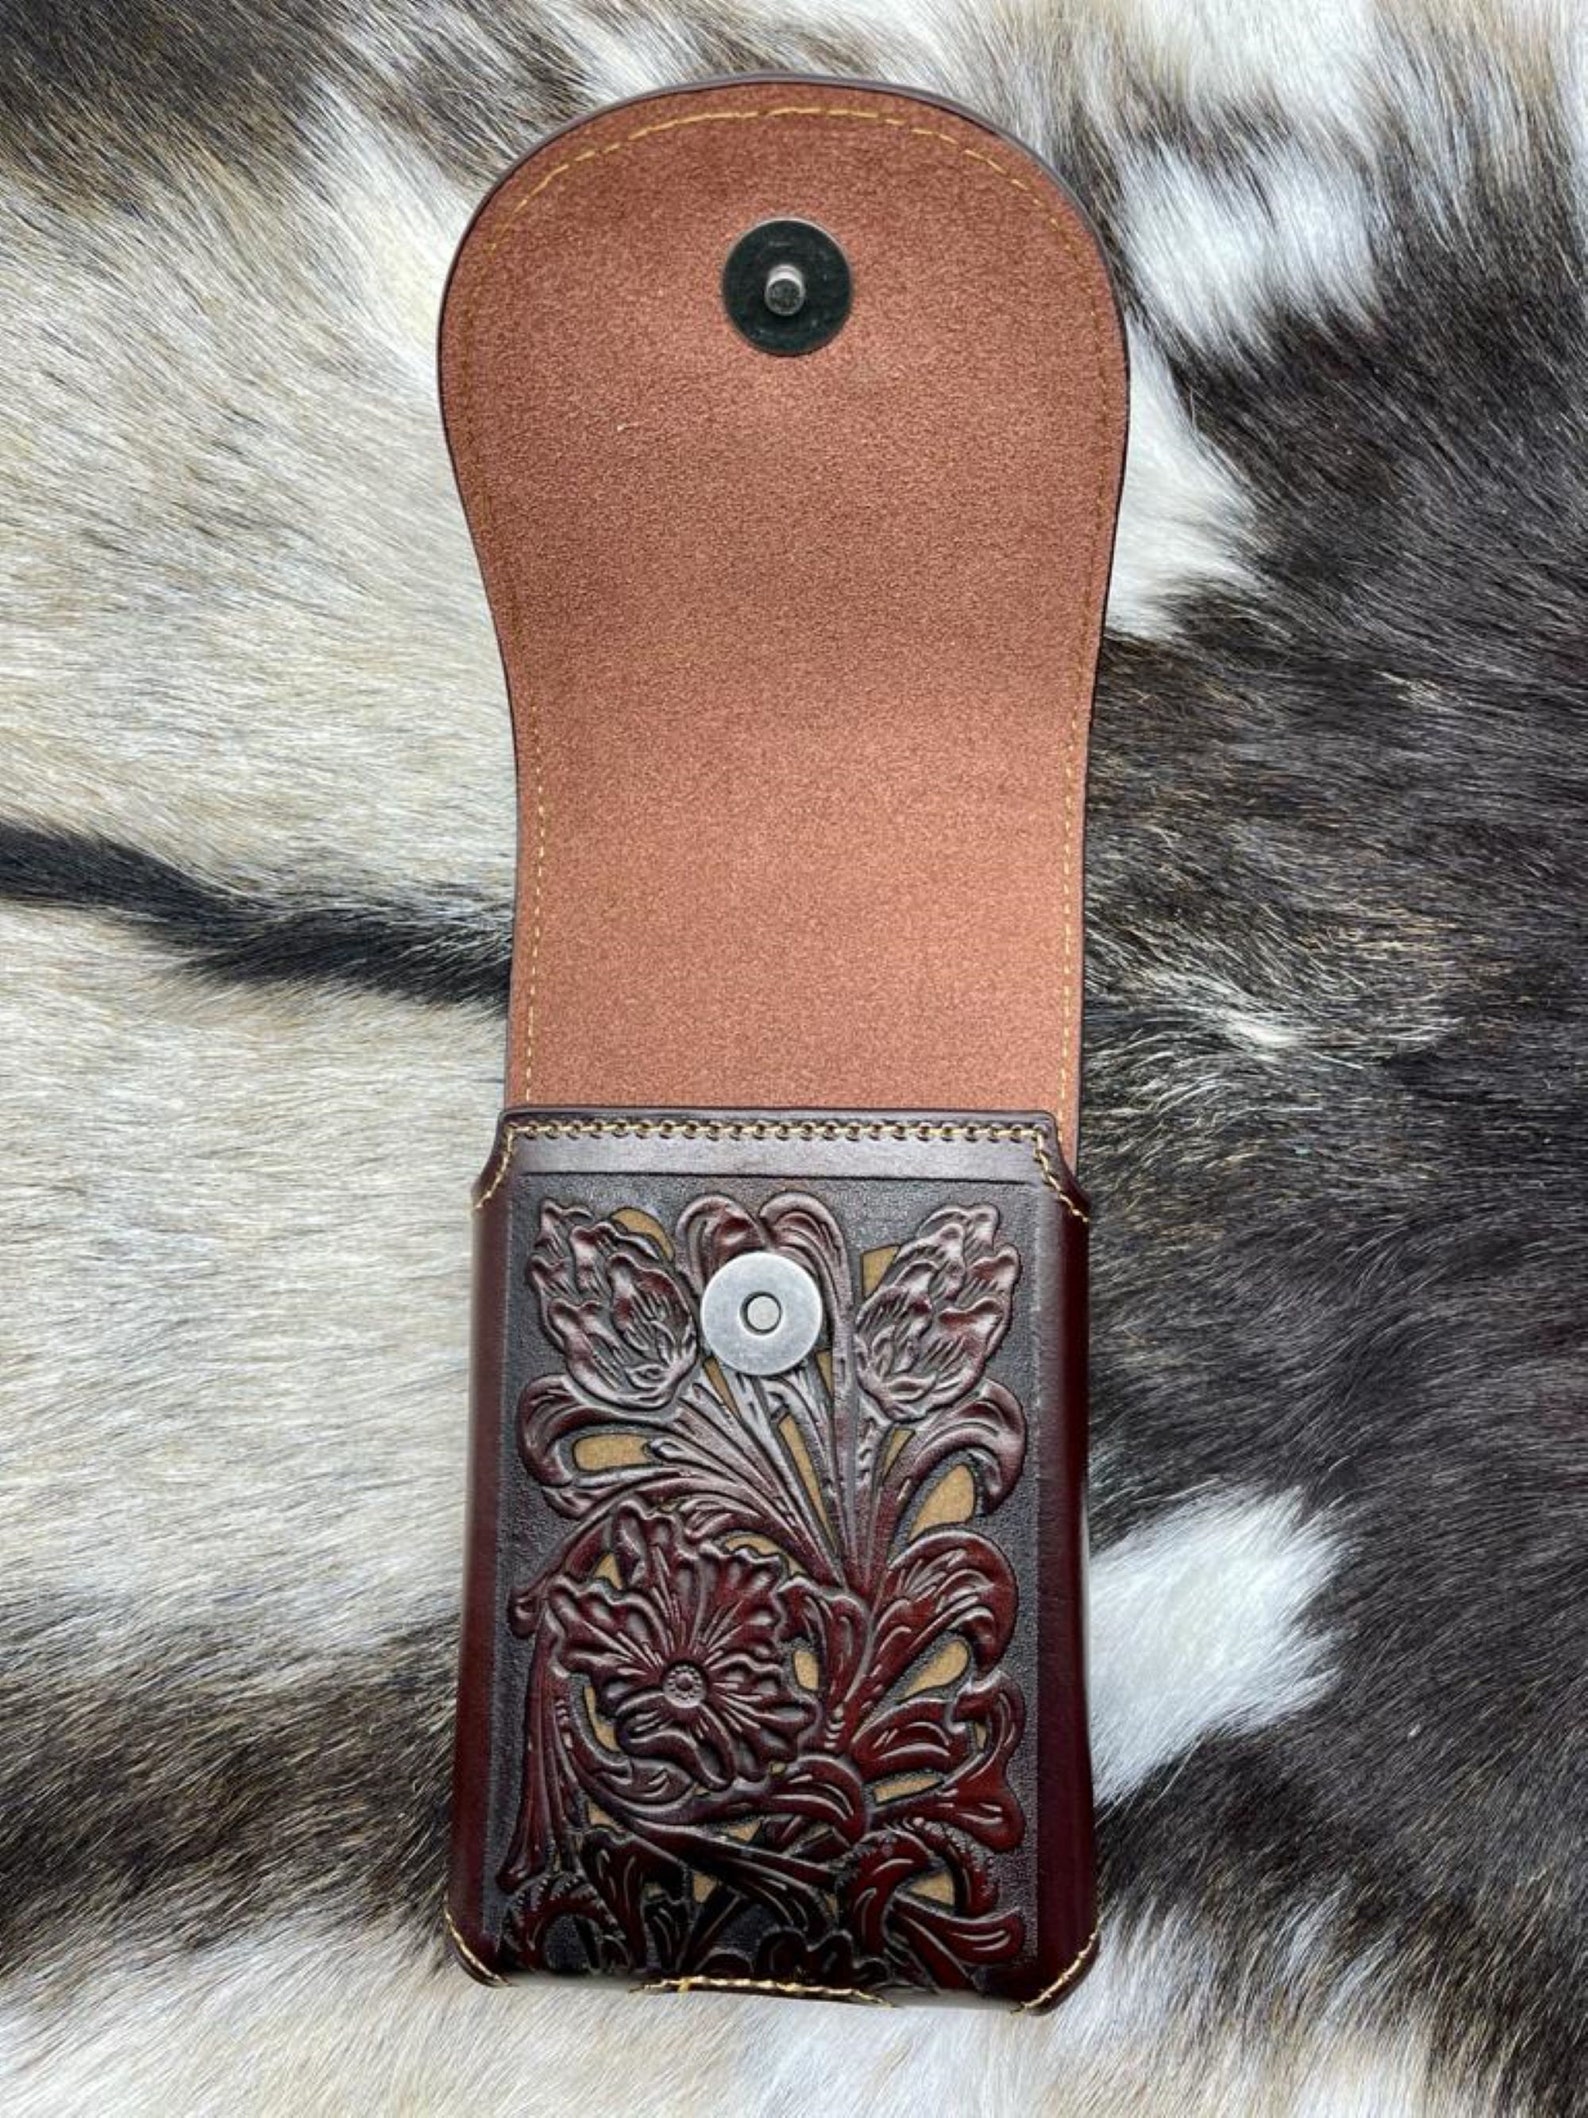 Western Cowboy Genuine Leather Design With Rooster Concho Belt - Etsy